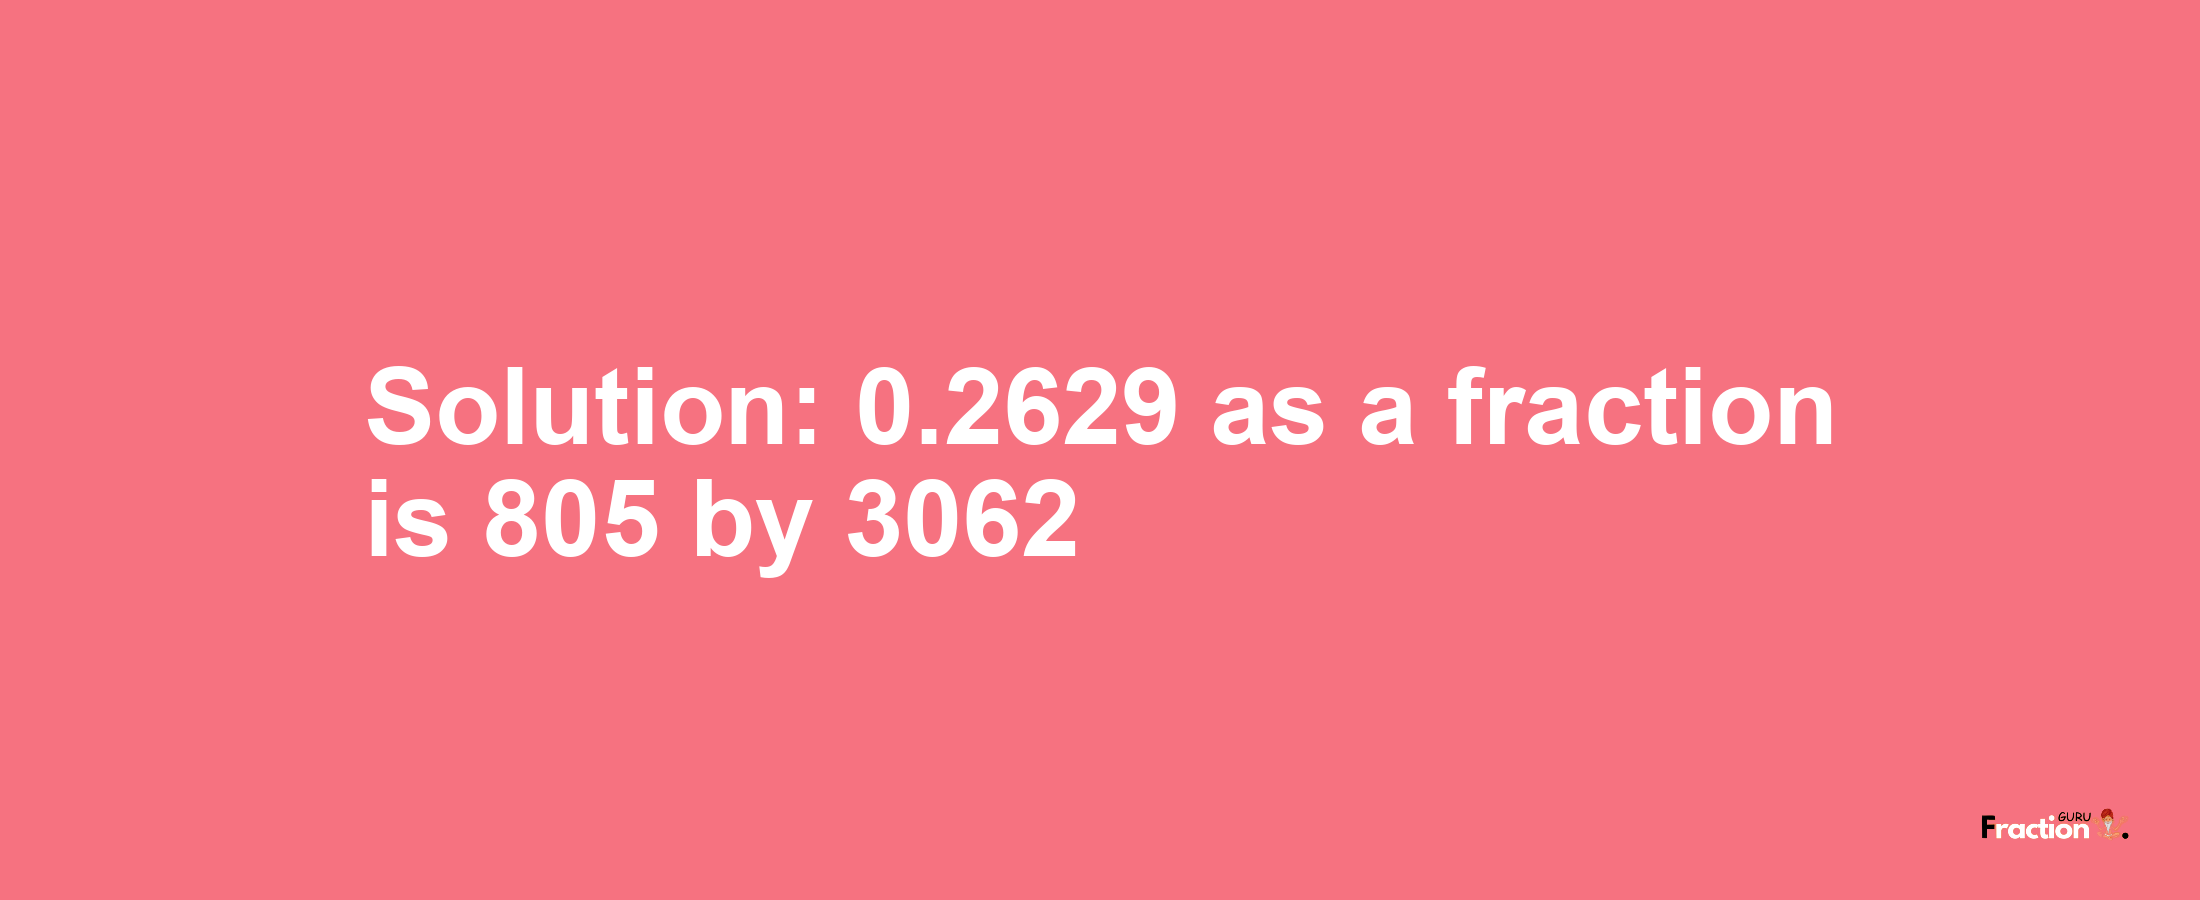 Solution:0.2629 as a fraction is 805/3062